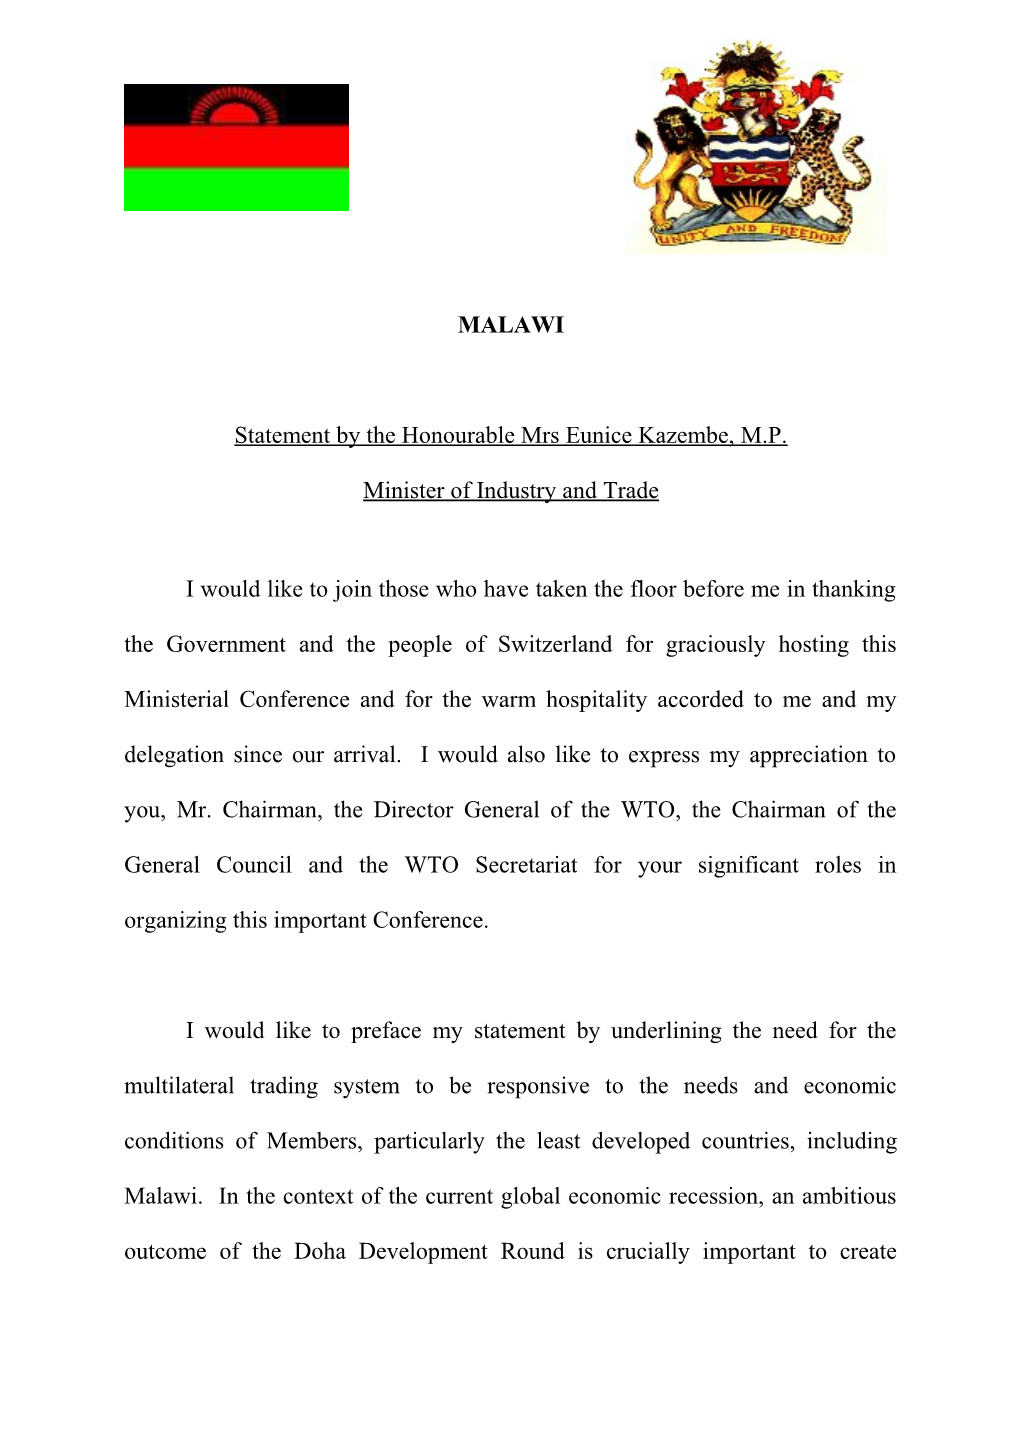 Statement by the Honourable Mrs Eunice Kazembe, M.P